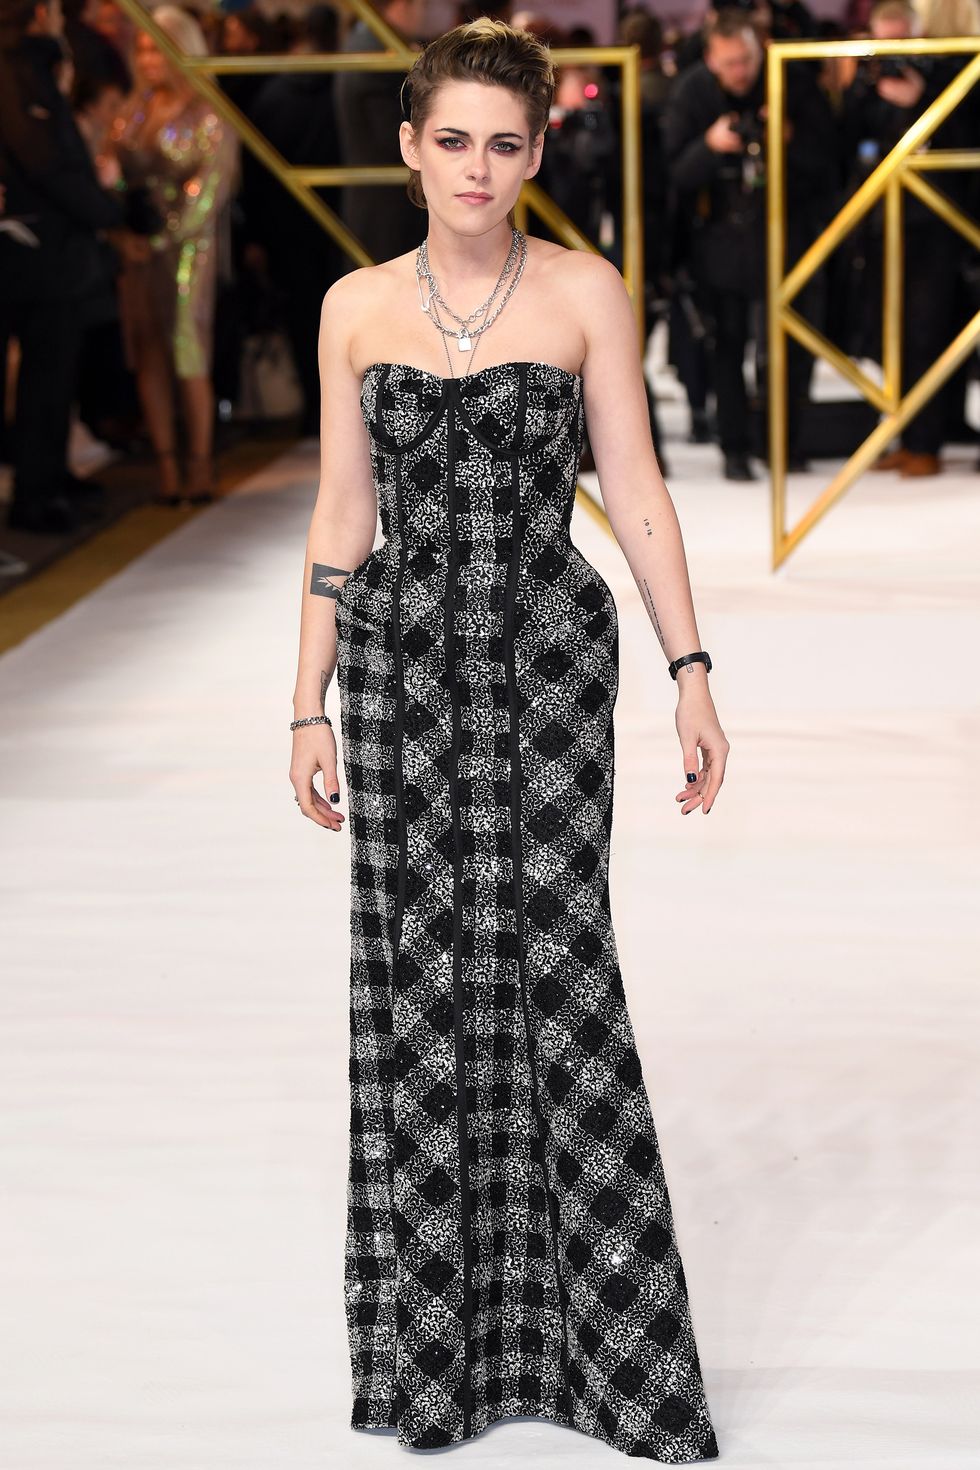 Kristen Stewart Wears Chanel Couture and Bedazzled Sneakers in